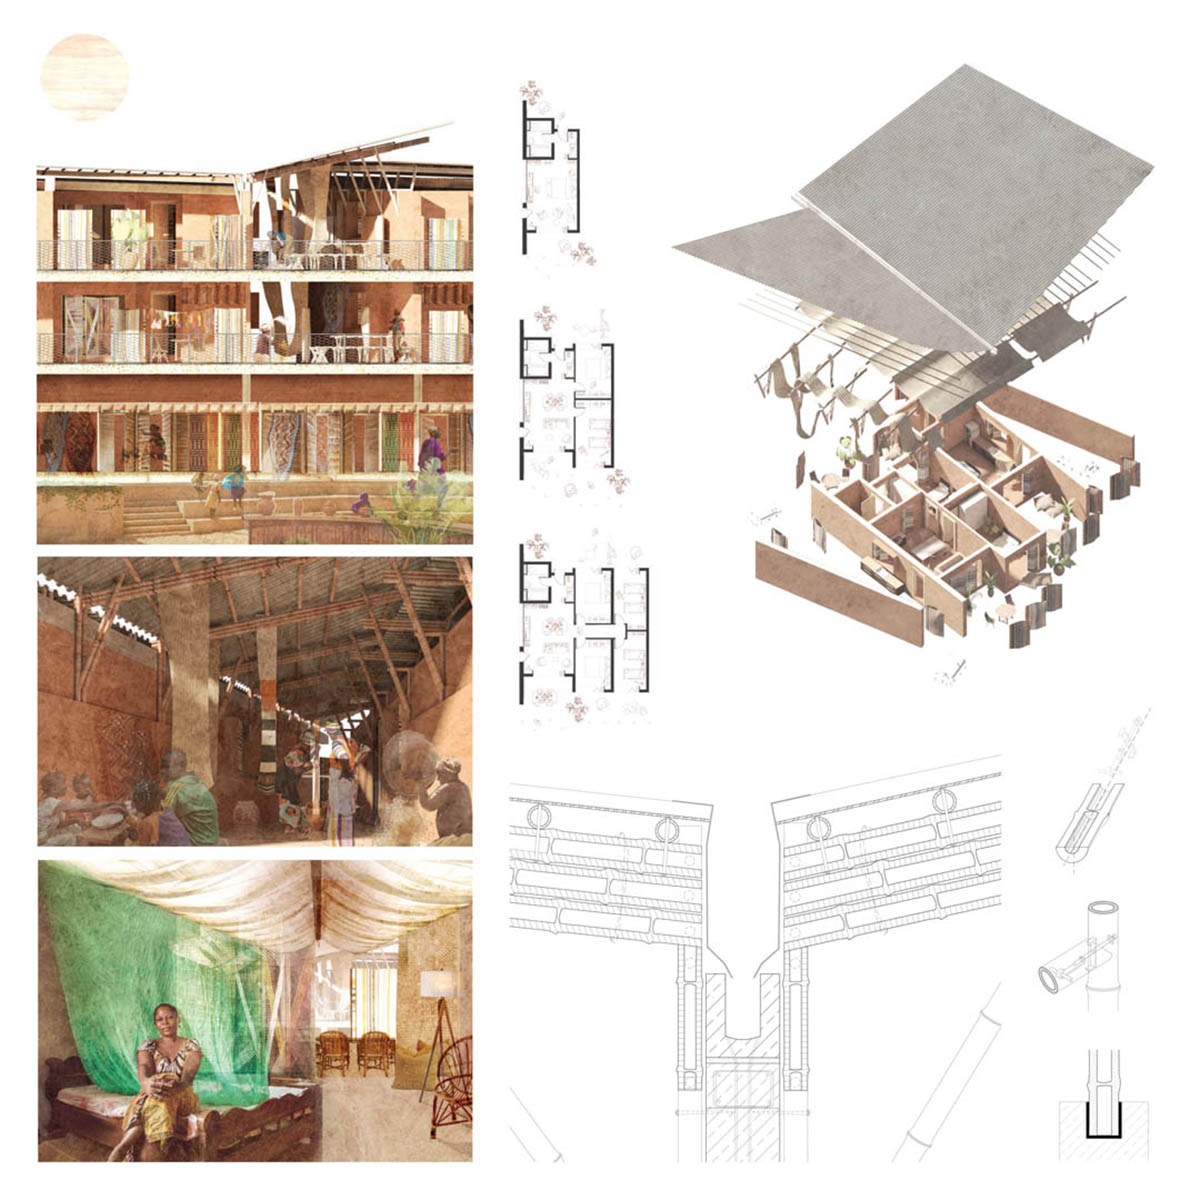 architecture master thesis award